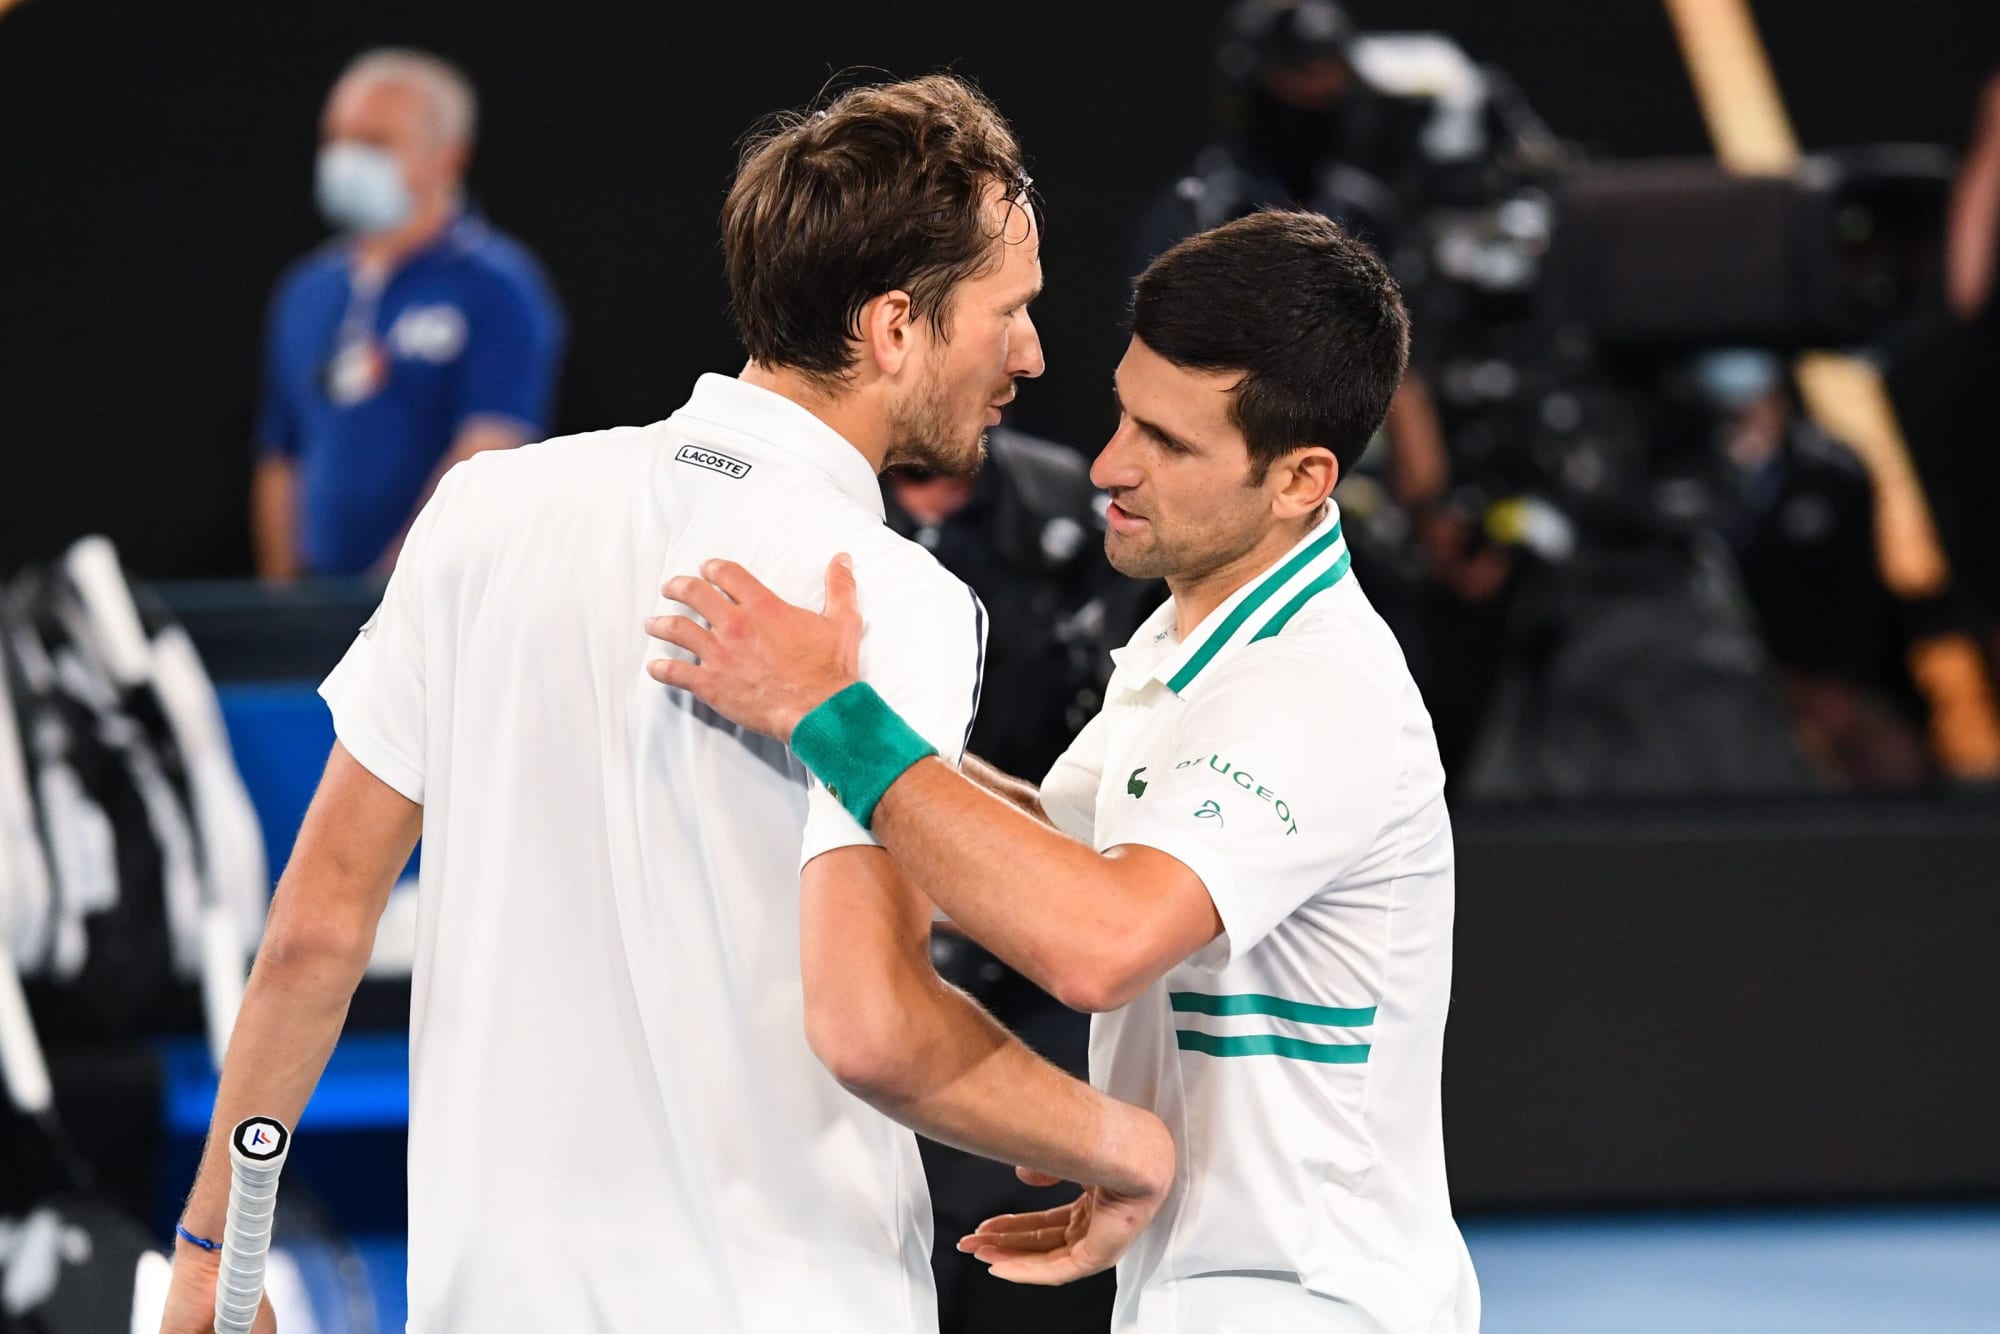 Do you think next gen has what it takes to beat Djokovic and Nadal and WIN Australian Open, Roland Garros or Wimbledon?